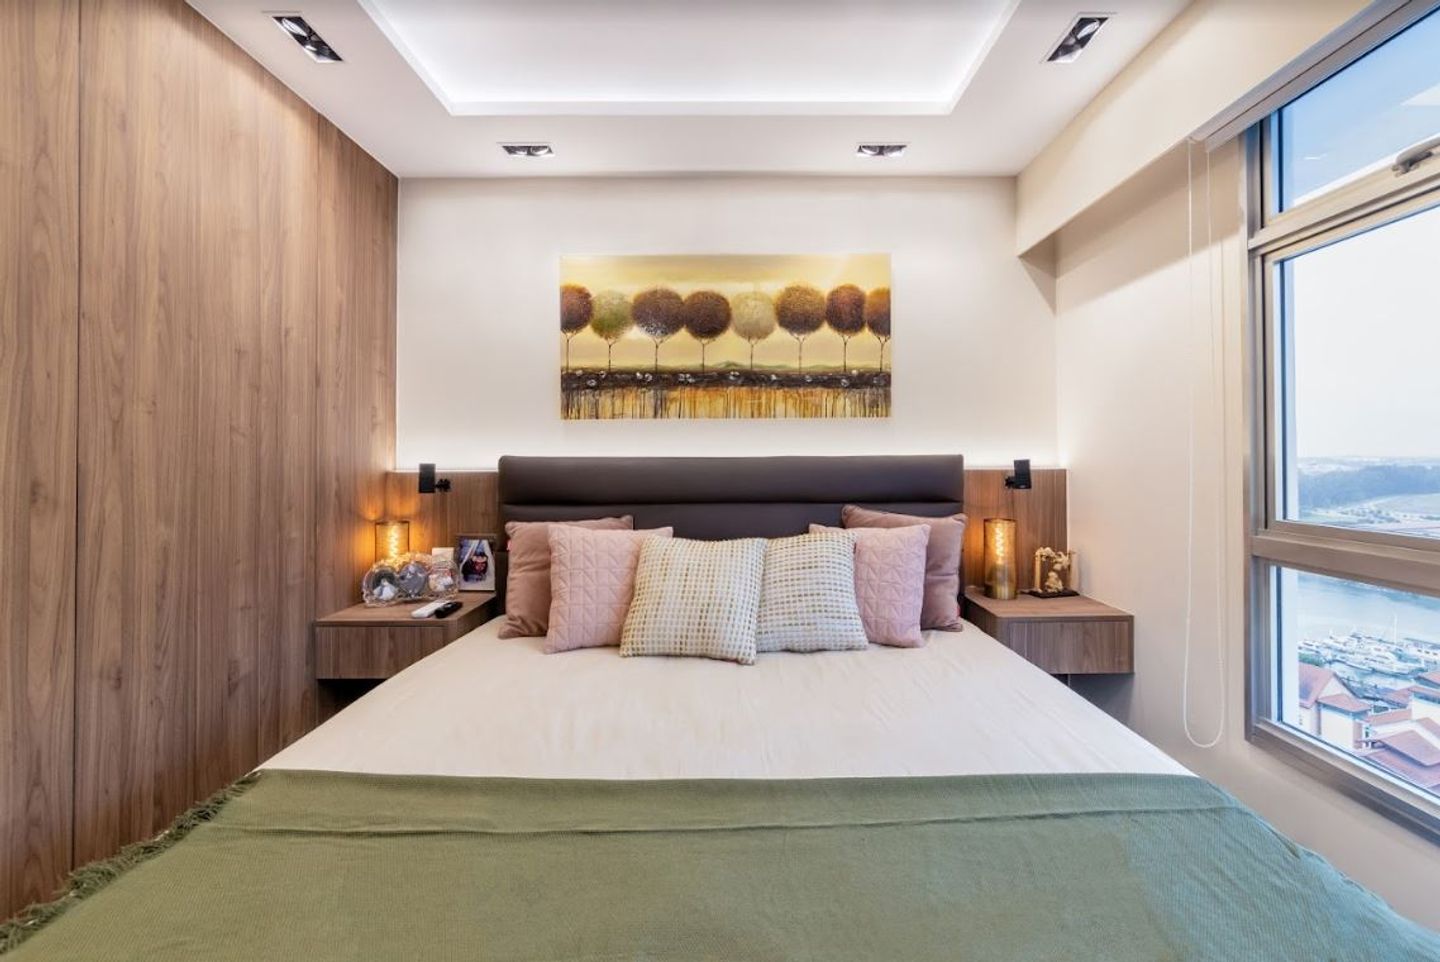 White False Ceiling For Compact Bedrooms - Livspace